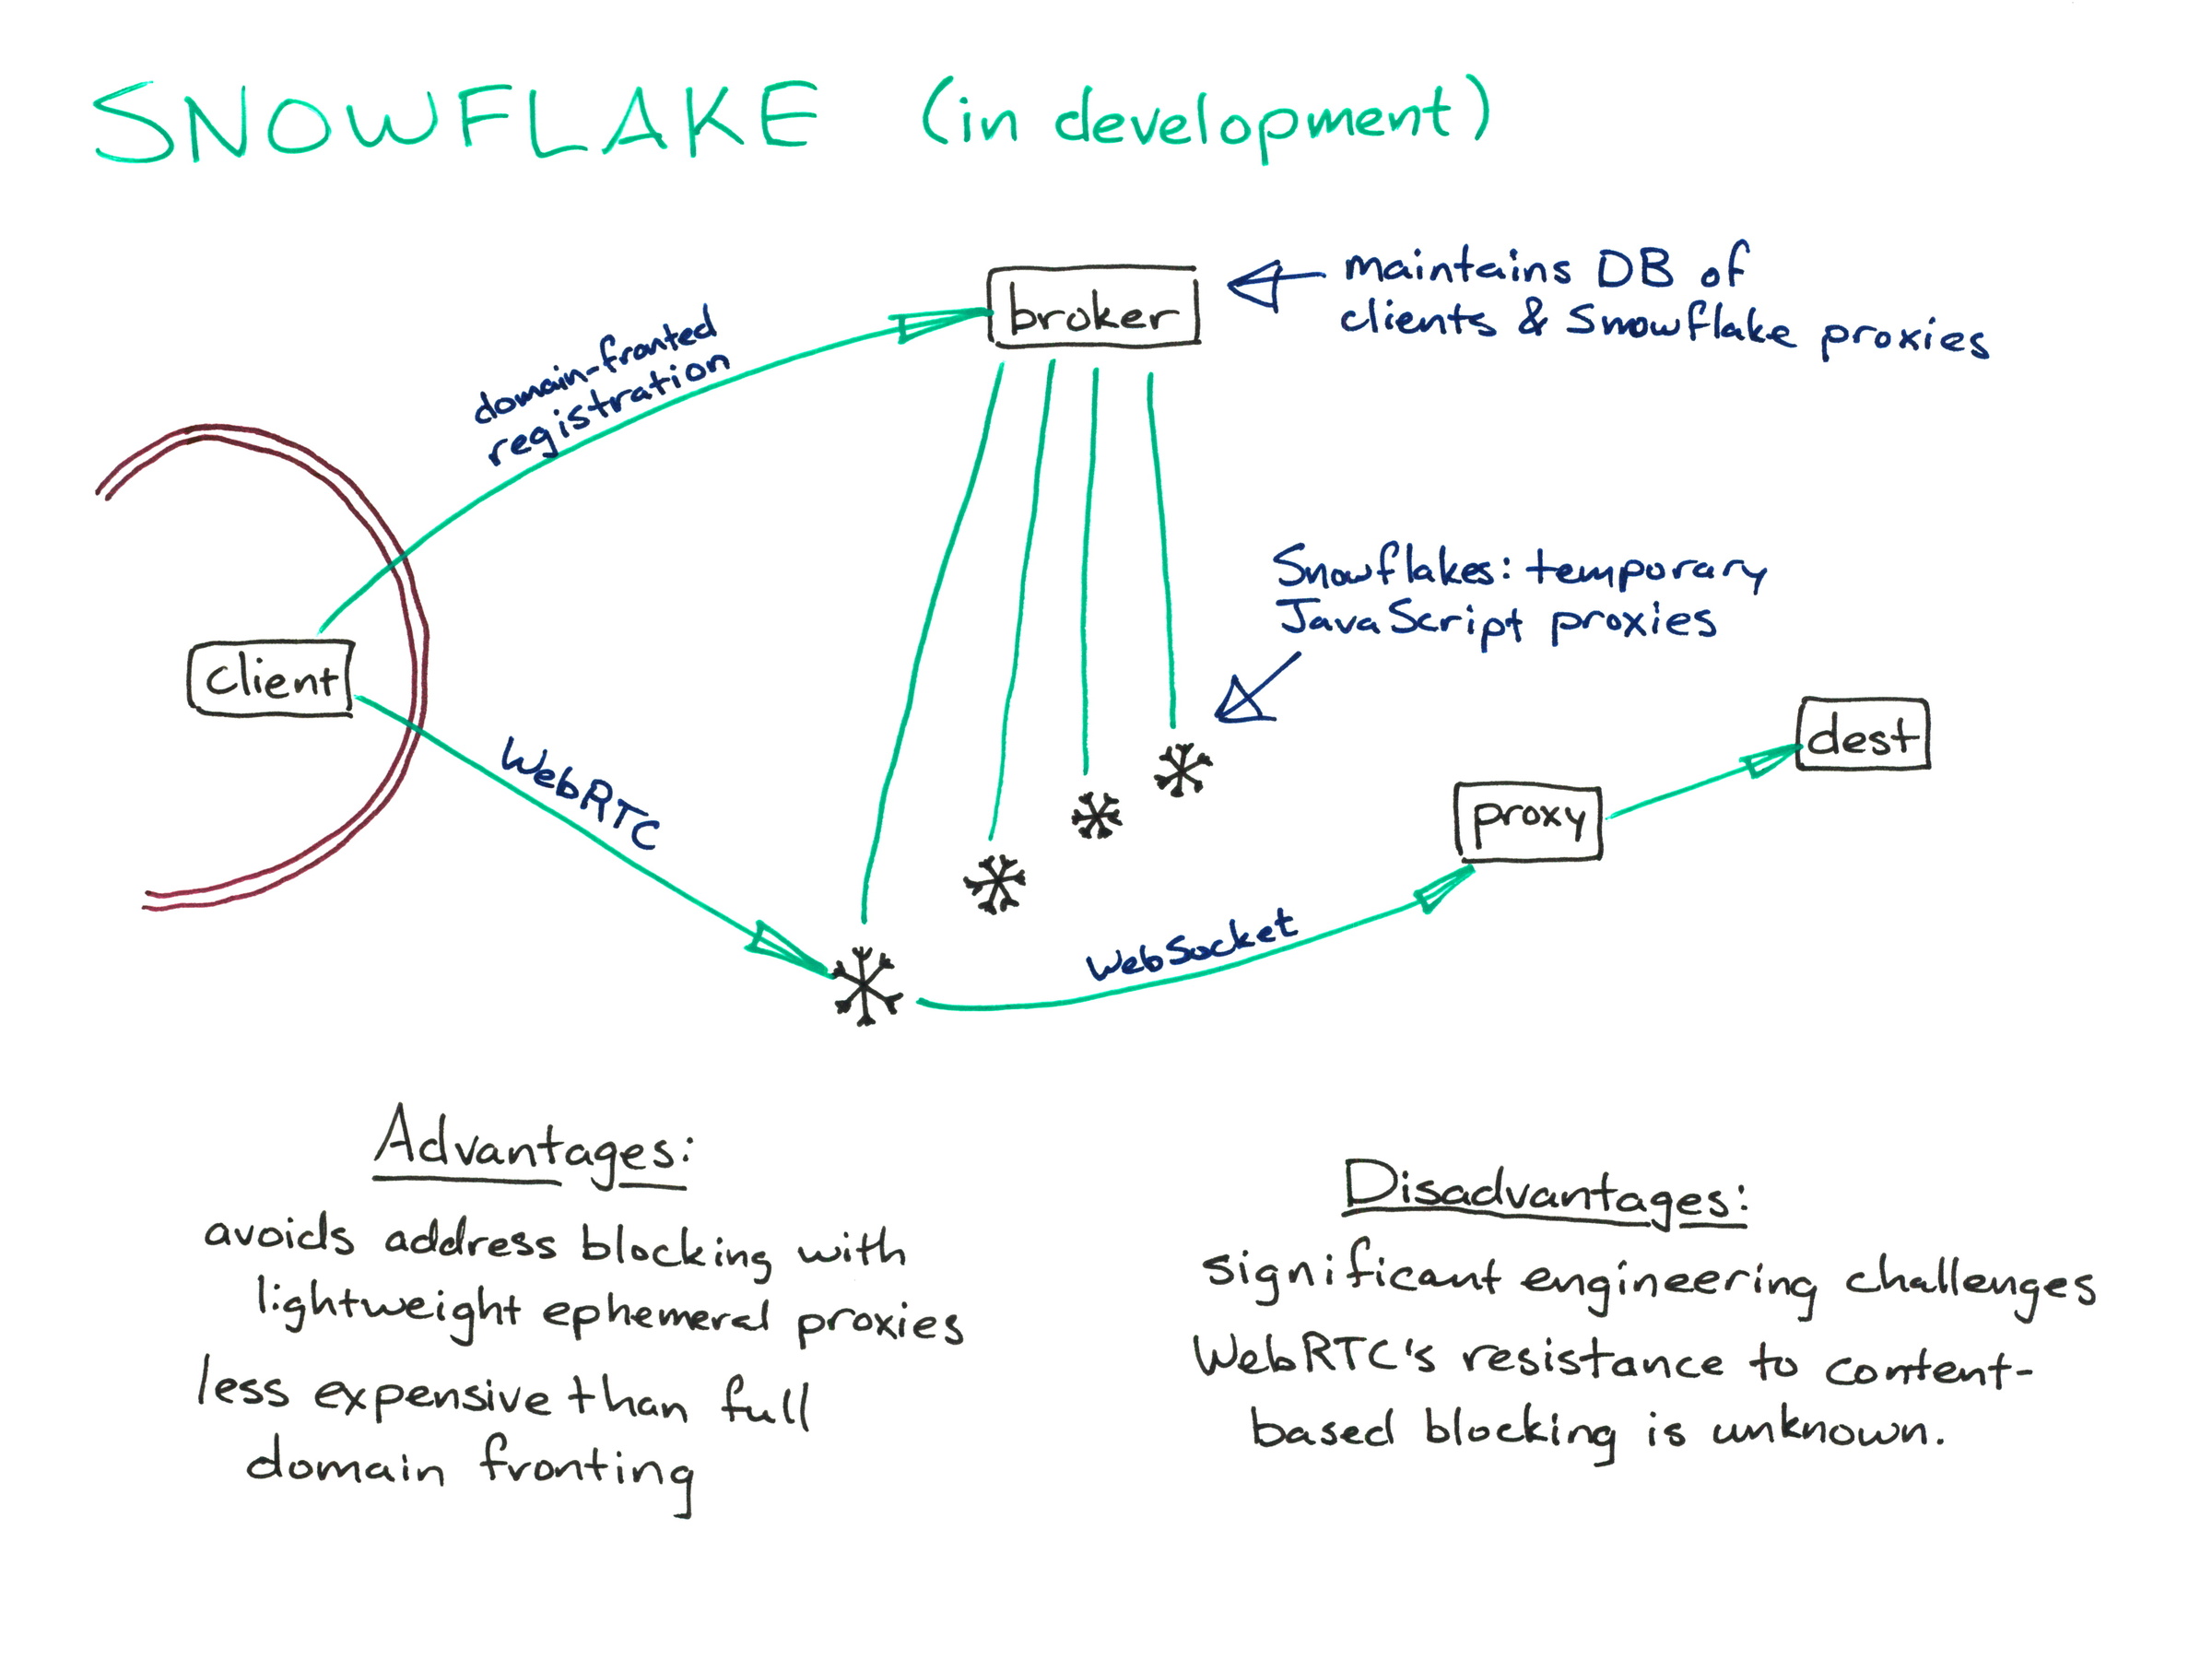 
SNOWFLAKE (in development)

[diagram of Snowflake]

Advantages:
avoids address blocking with lightweight ephemeral proxies
less expensive than full domain fronting

Disadvantages:
significant engineering challenges
WebRTC’s resistance to content-based blocking is unknown.
